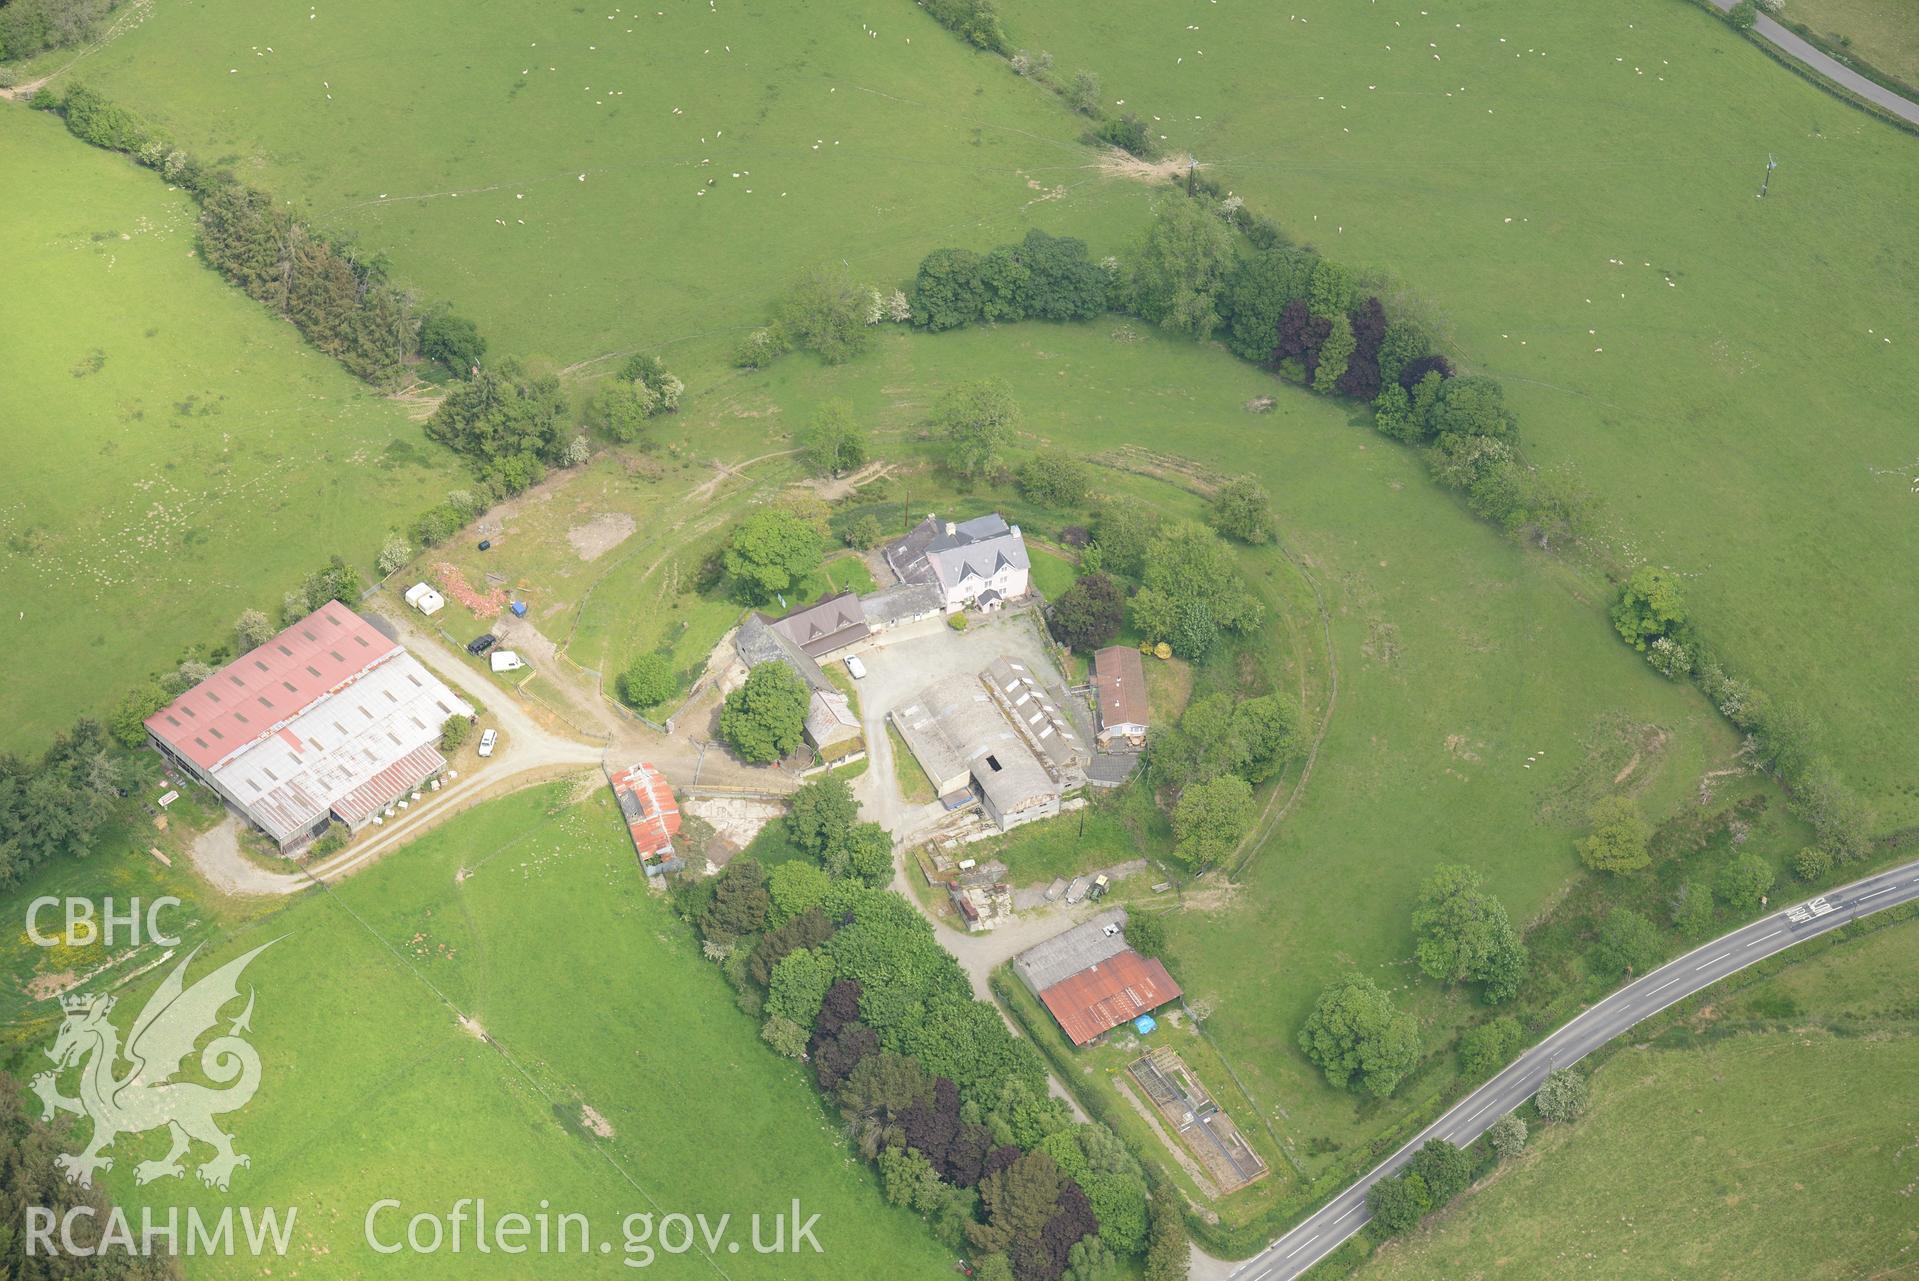 Colwyn Castle, Colwyn Castle Roman fort and Fforest Farmhouse, near Builth Wells. Oblique aerial photograph taken during the Royal Commission's programme of archaeological aerial reconnaissance by Toby Driver on 11th June 2015.